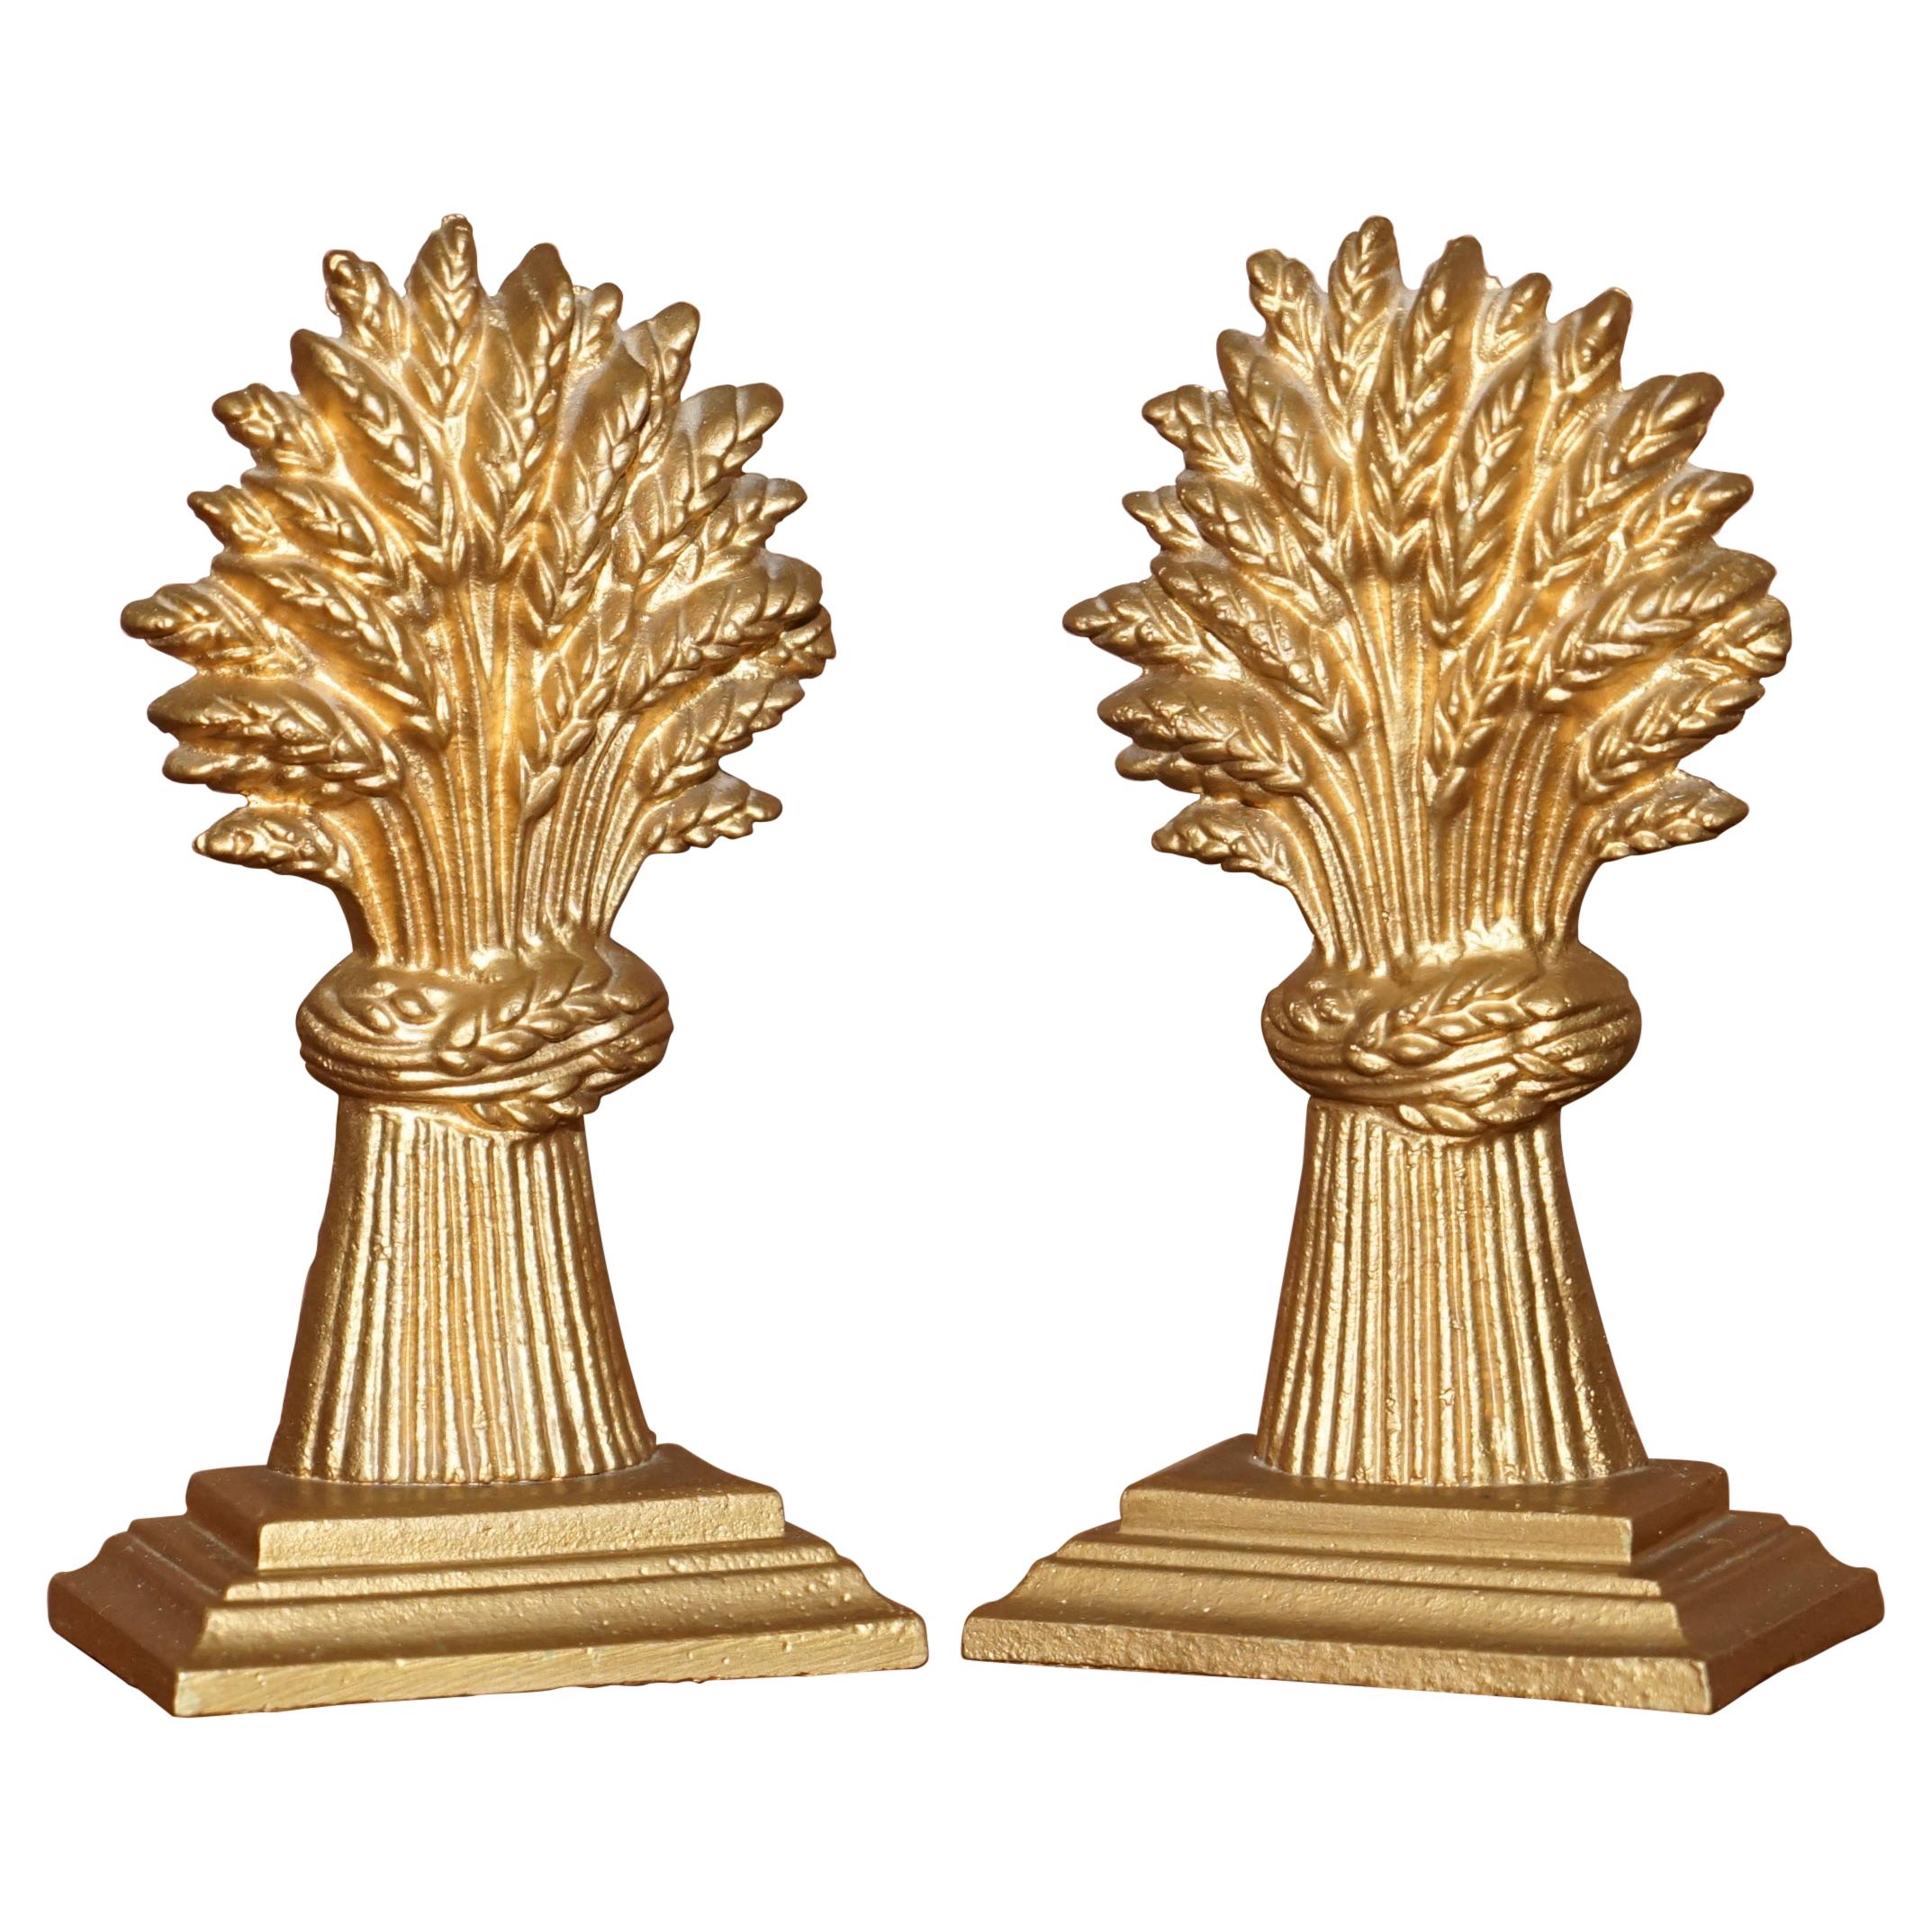 Matching Pair of Vintage circa 1930's Brass Wheat Sheaves Door Stops